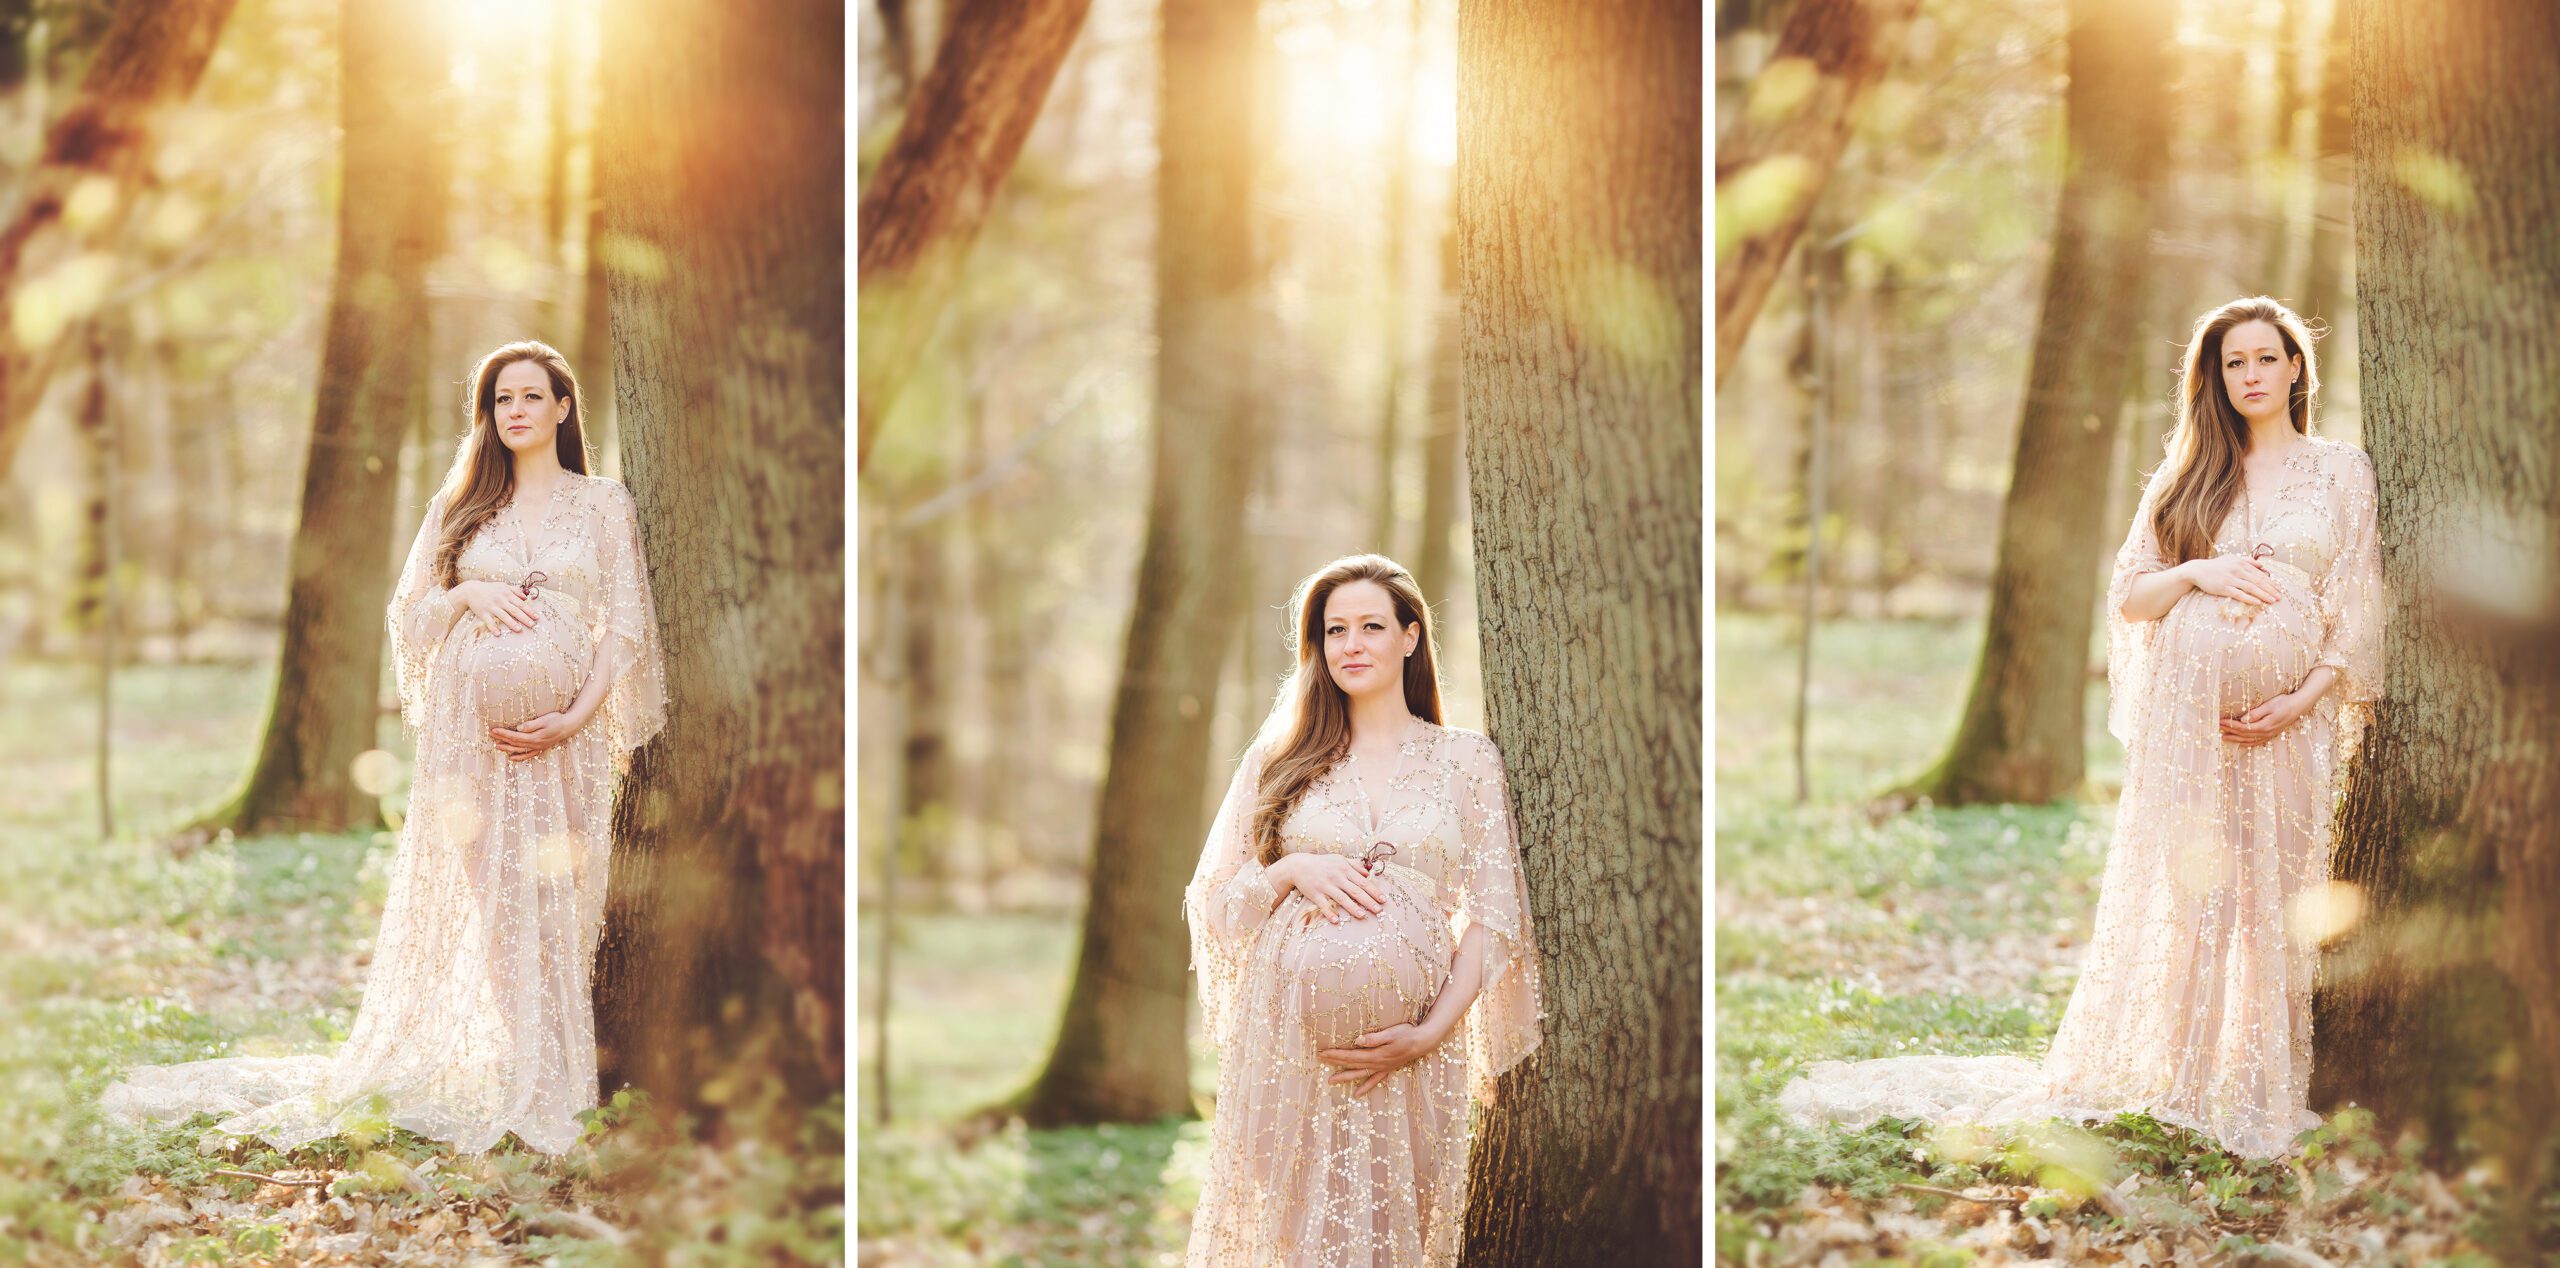 New tree leaves make a gorgeous filter for this spring maternity session by Frankfurt maternity photographer